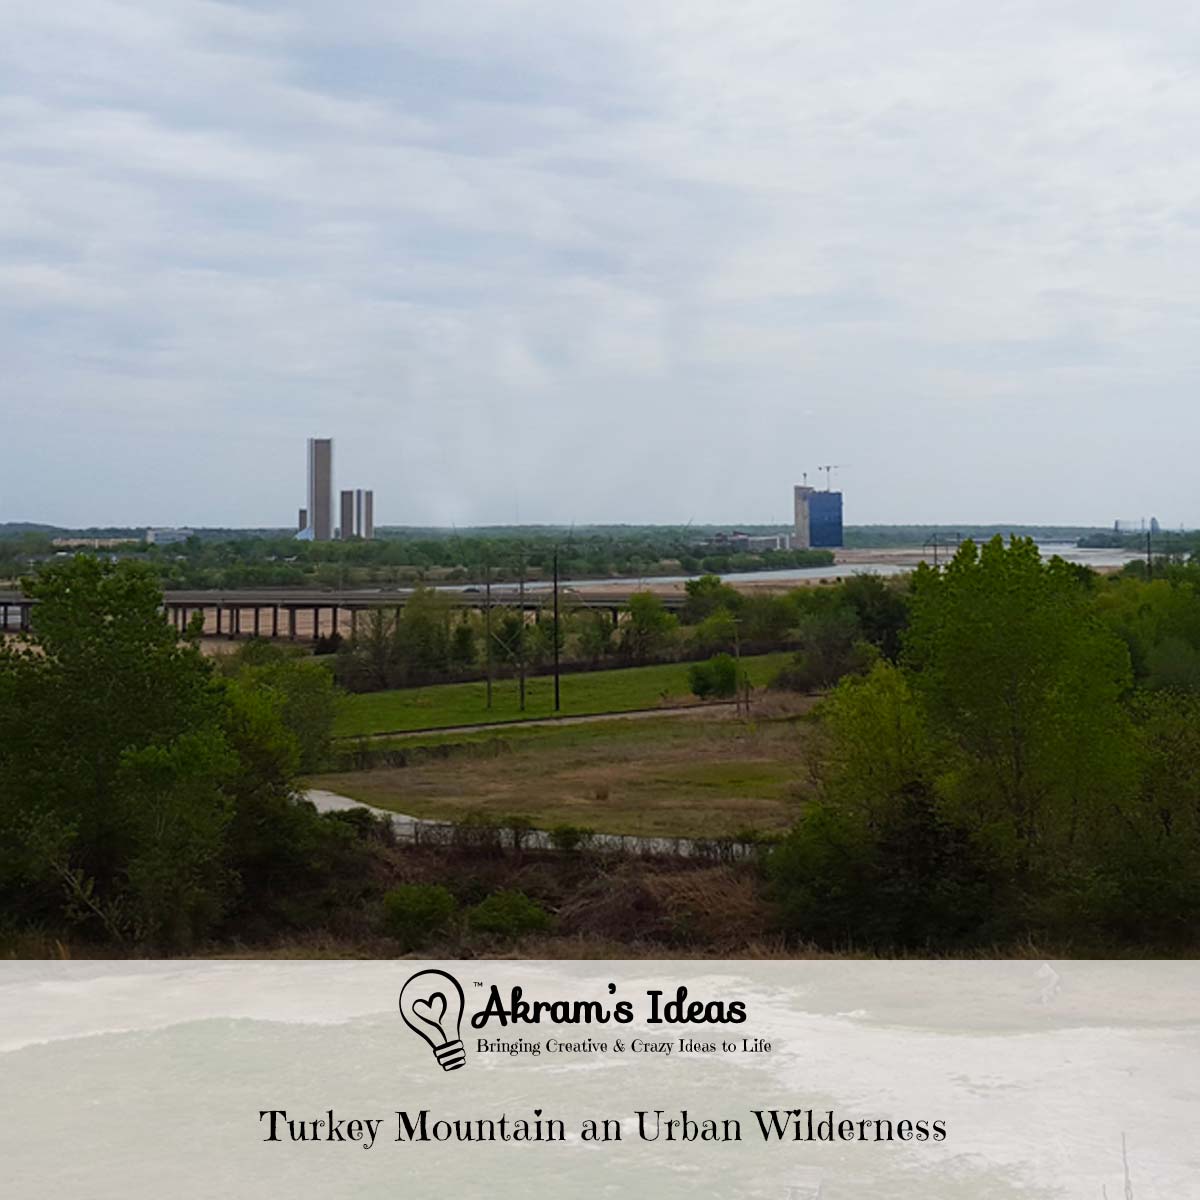 Turkey mountain is a 300-acre Wilderness right in the heart of Tulsa is the perfect place for a fun family outing.